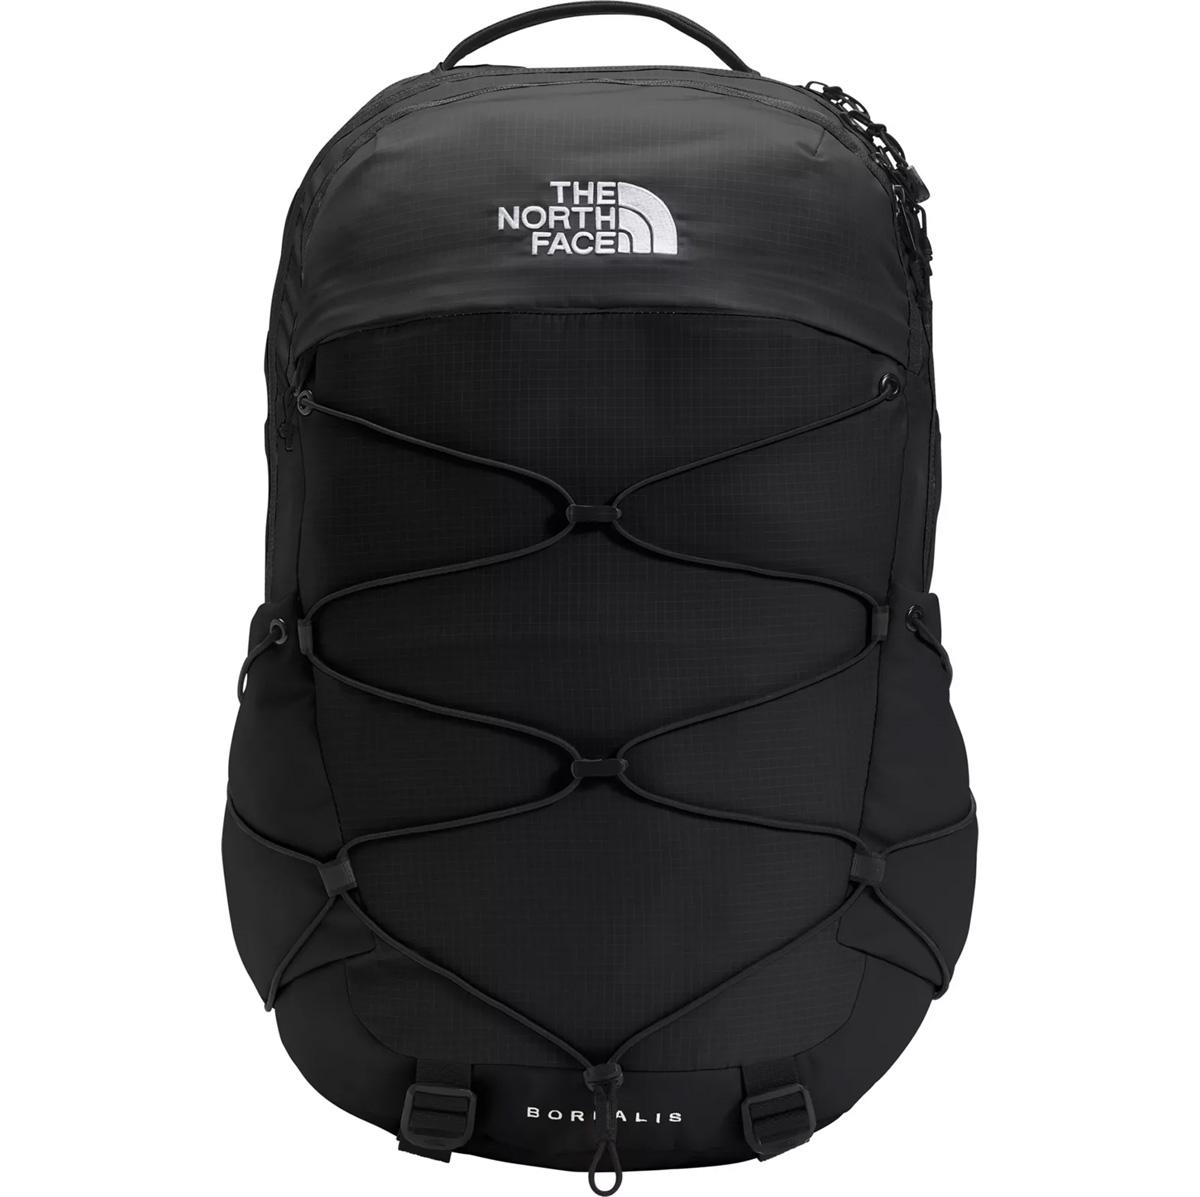 The North Face Borealis Backpack for $49.50 Shipped